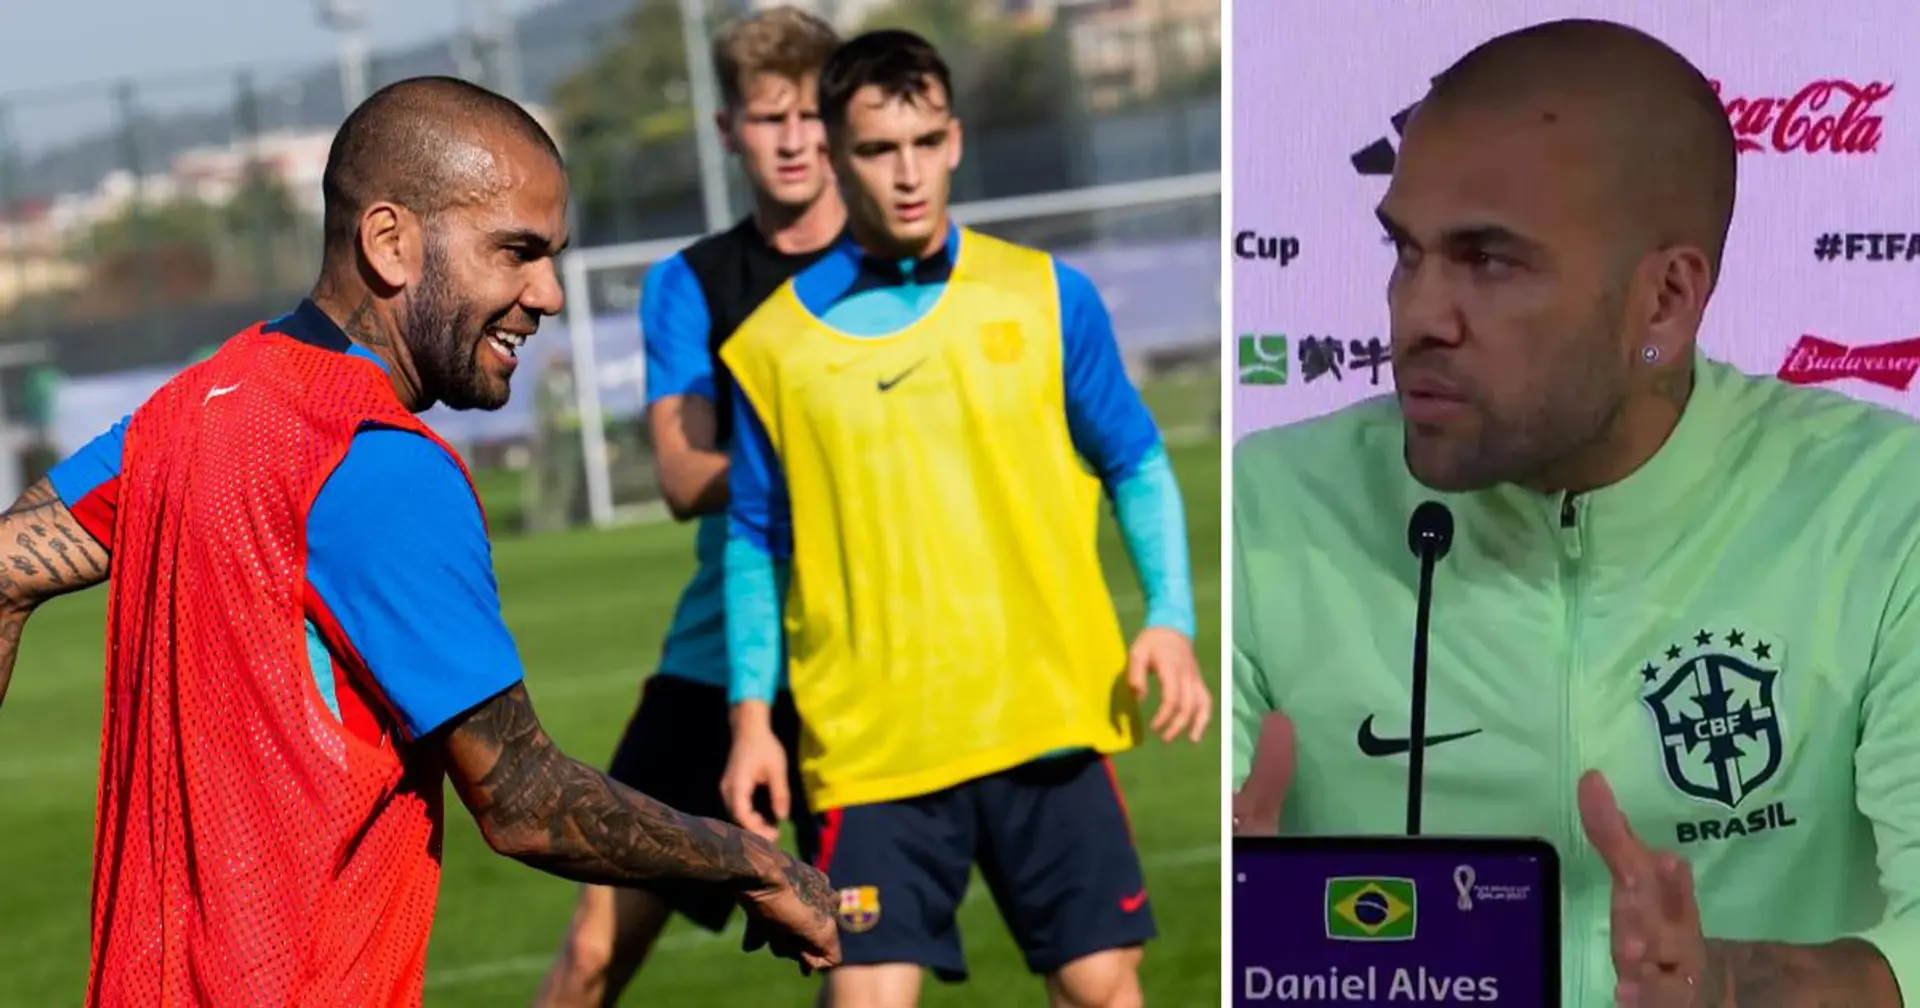 'I'm here thanks to them': Dani Alves grateful Barca let him train with reserves ahead of World Cup